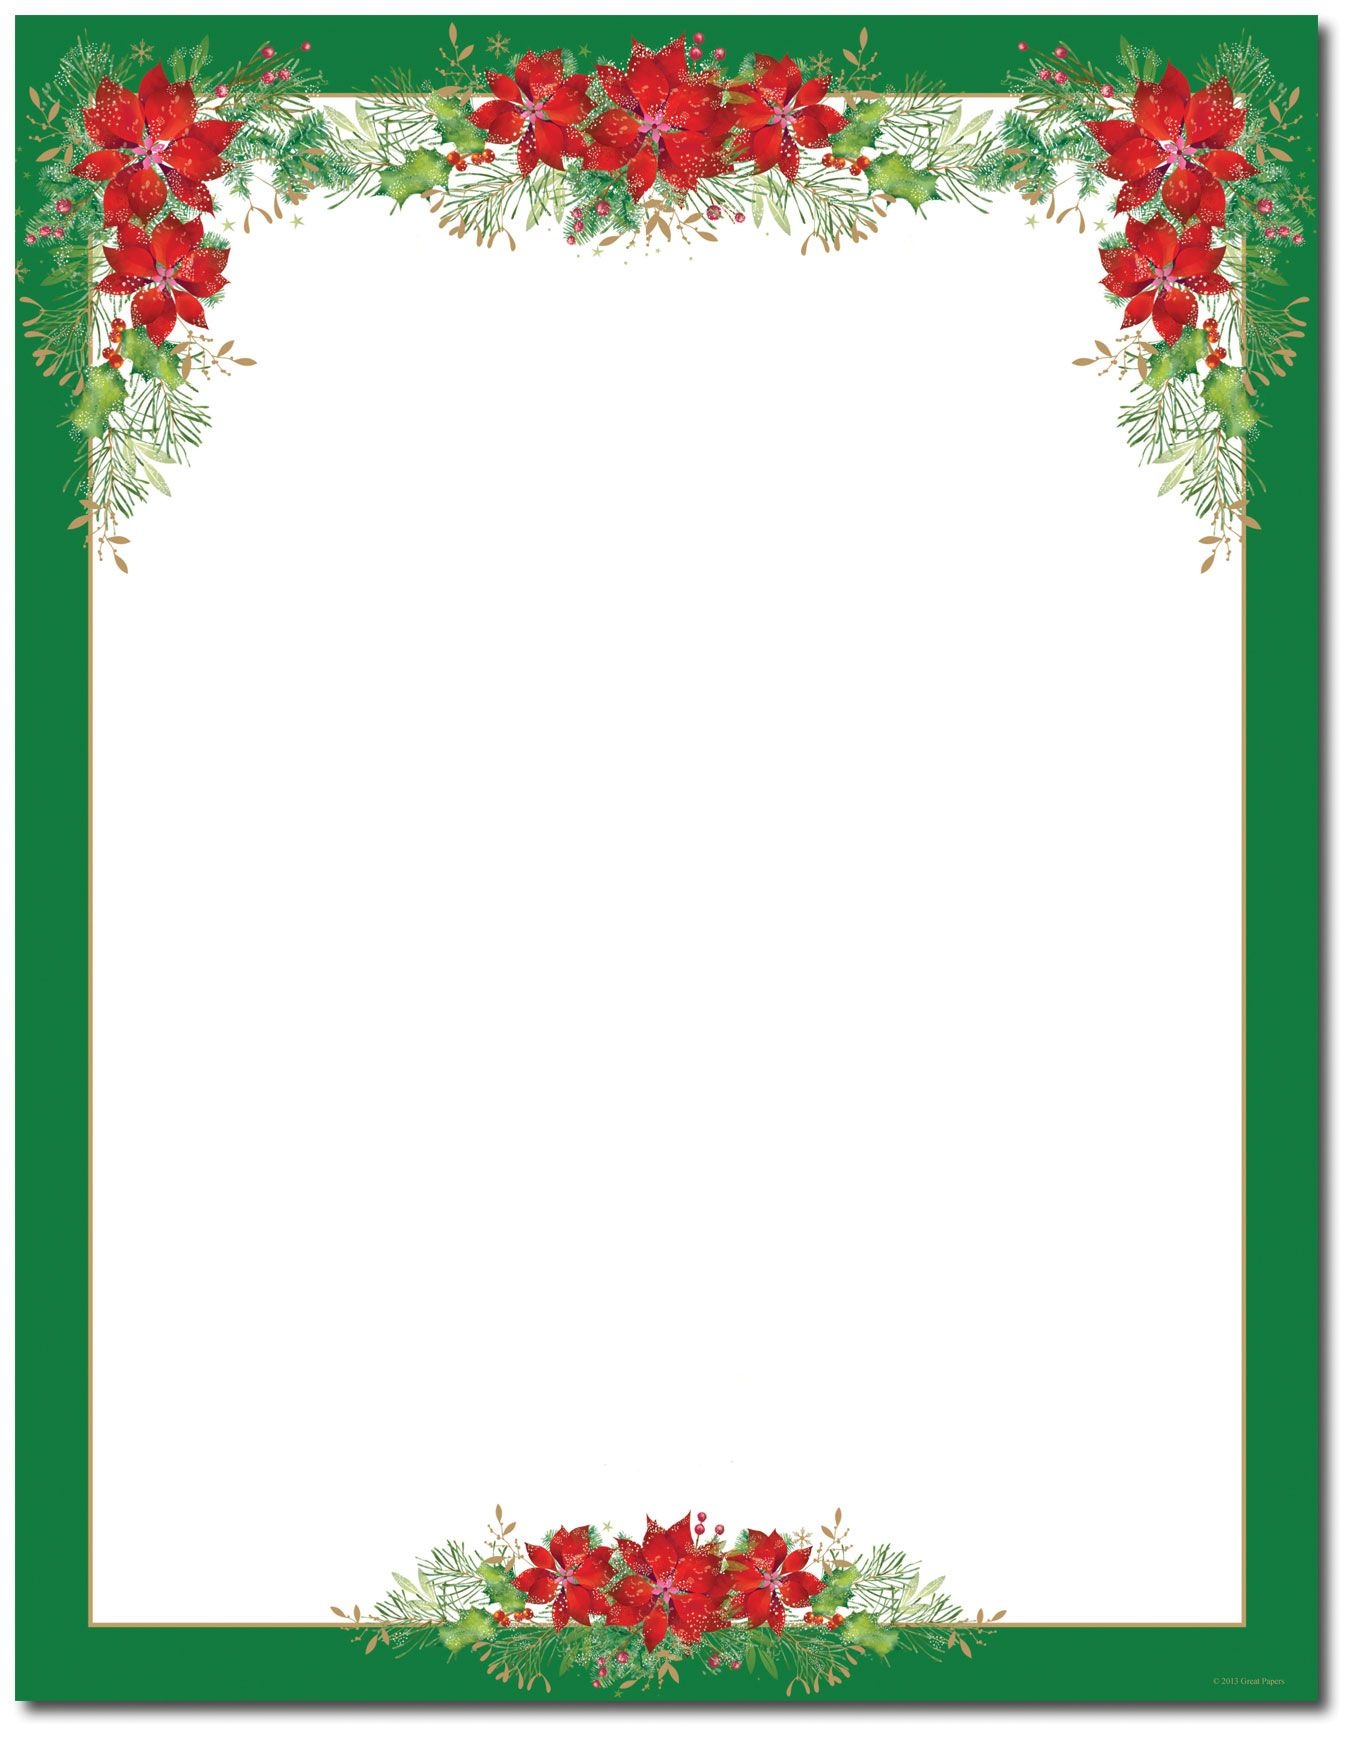 Poinsettia Valance Letterhead | Holiday Papers | Christmas Border - Free Printable Christmas Stationery Paper